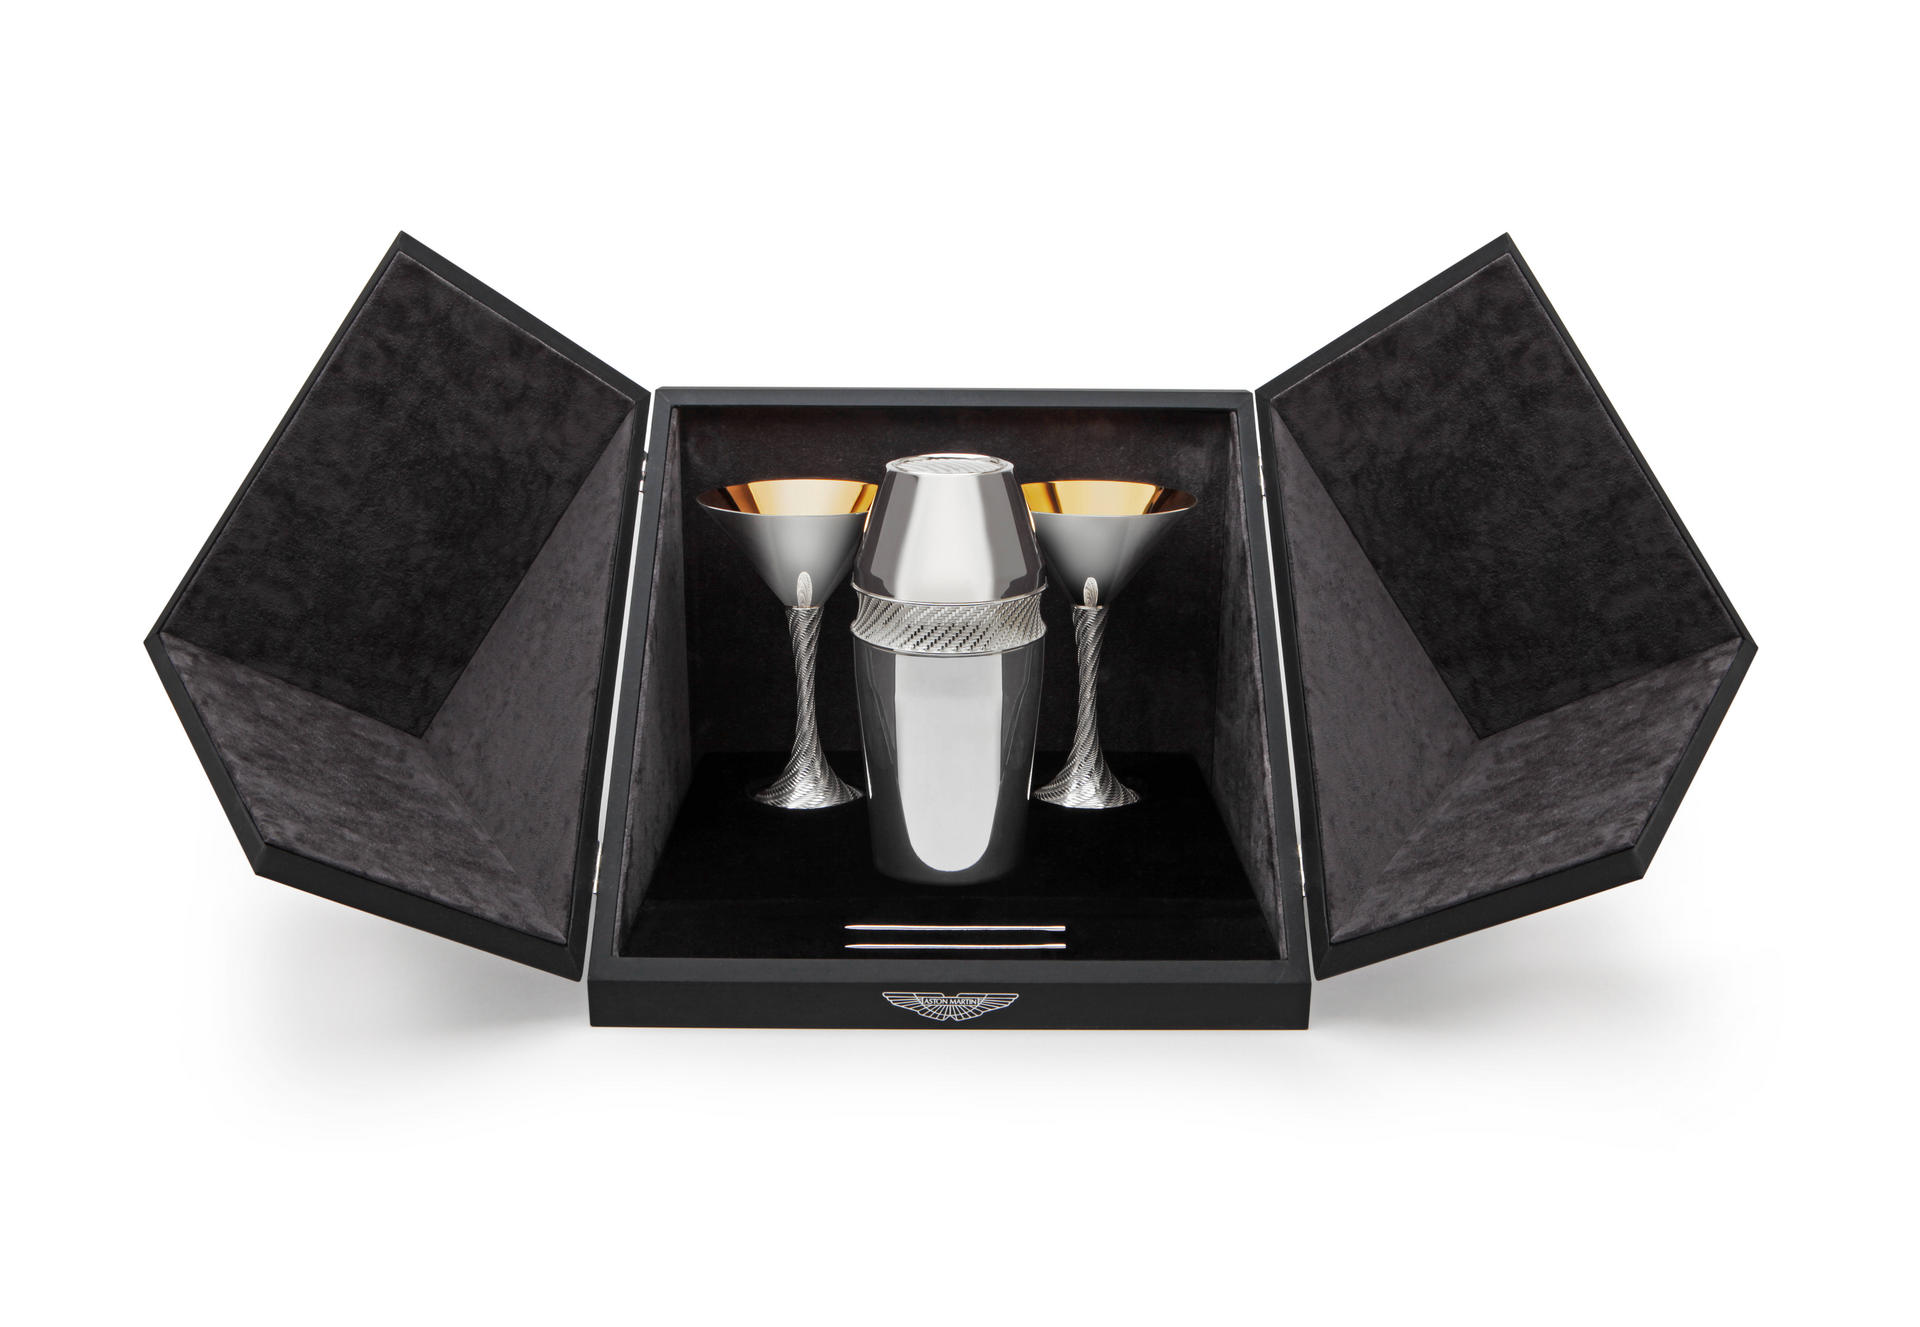 Aston MartinShow off your mixing skills with this handmade martini shaker set in 24ct gold and sterling silver. Limited to 100 pieces, HK$86,950